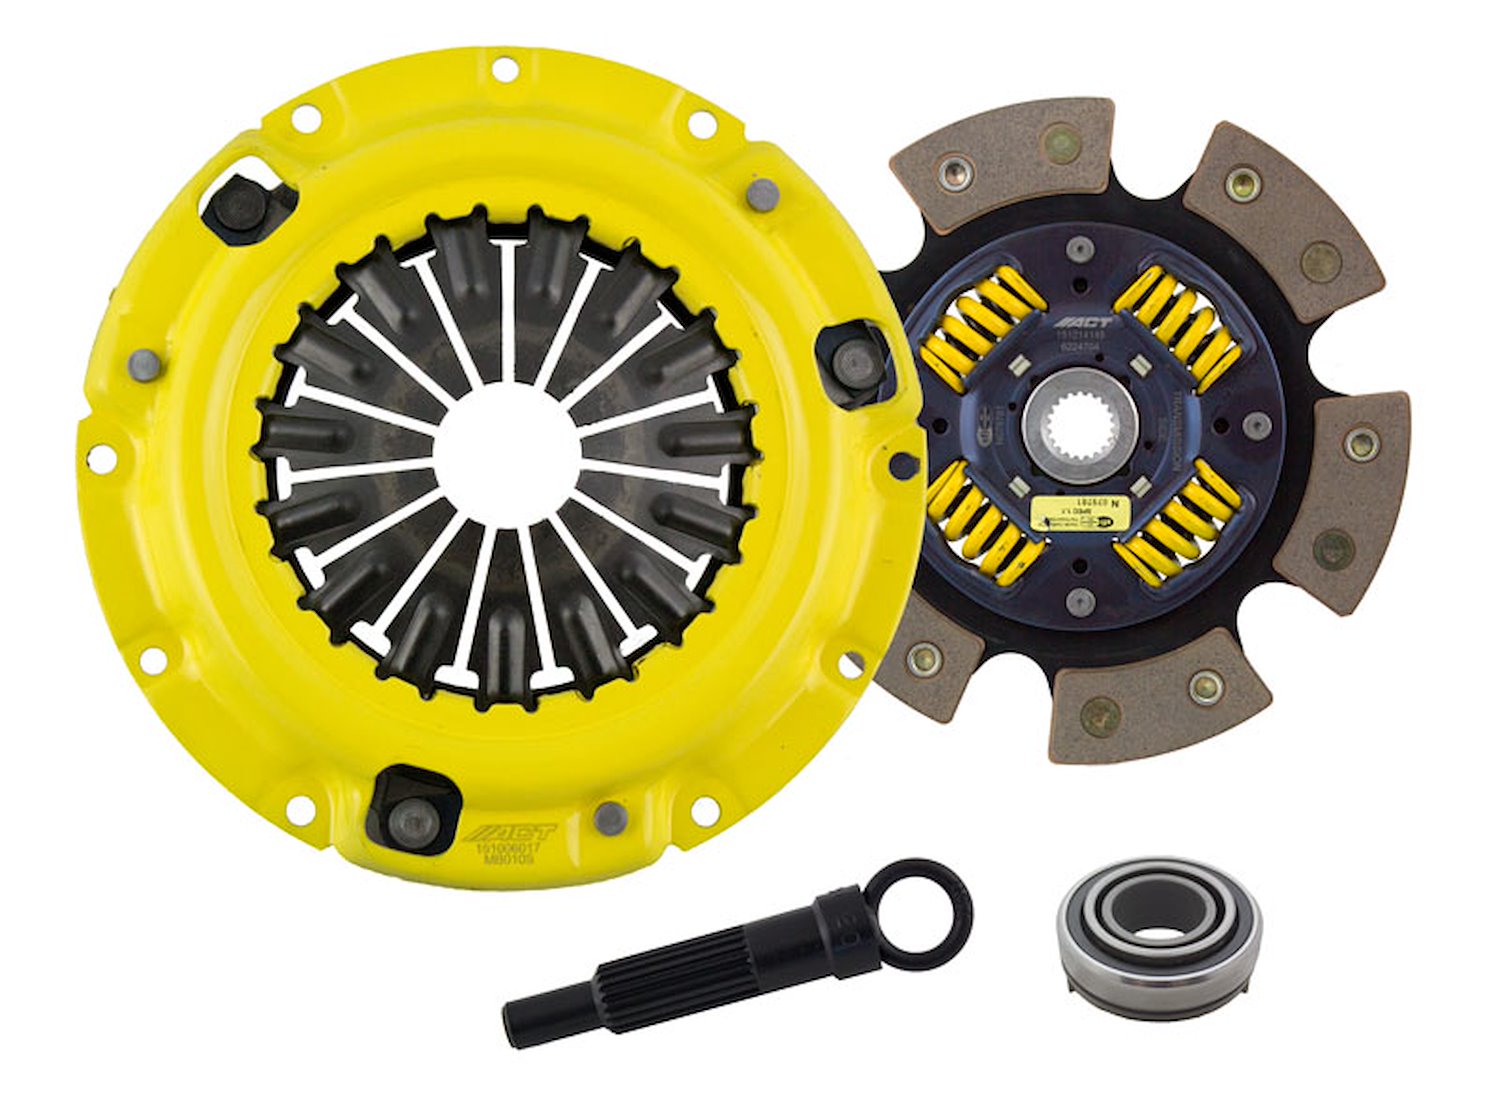 Sport/Race Sprung 6-Pad Transmission Clutch Kit Fits Select Chrysler/Dodge/Eagle/Mitsubishi/Plymouth